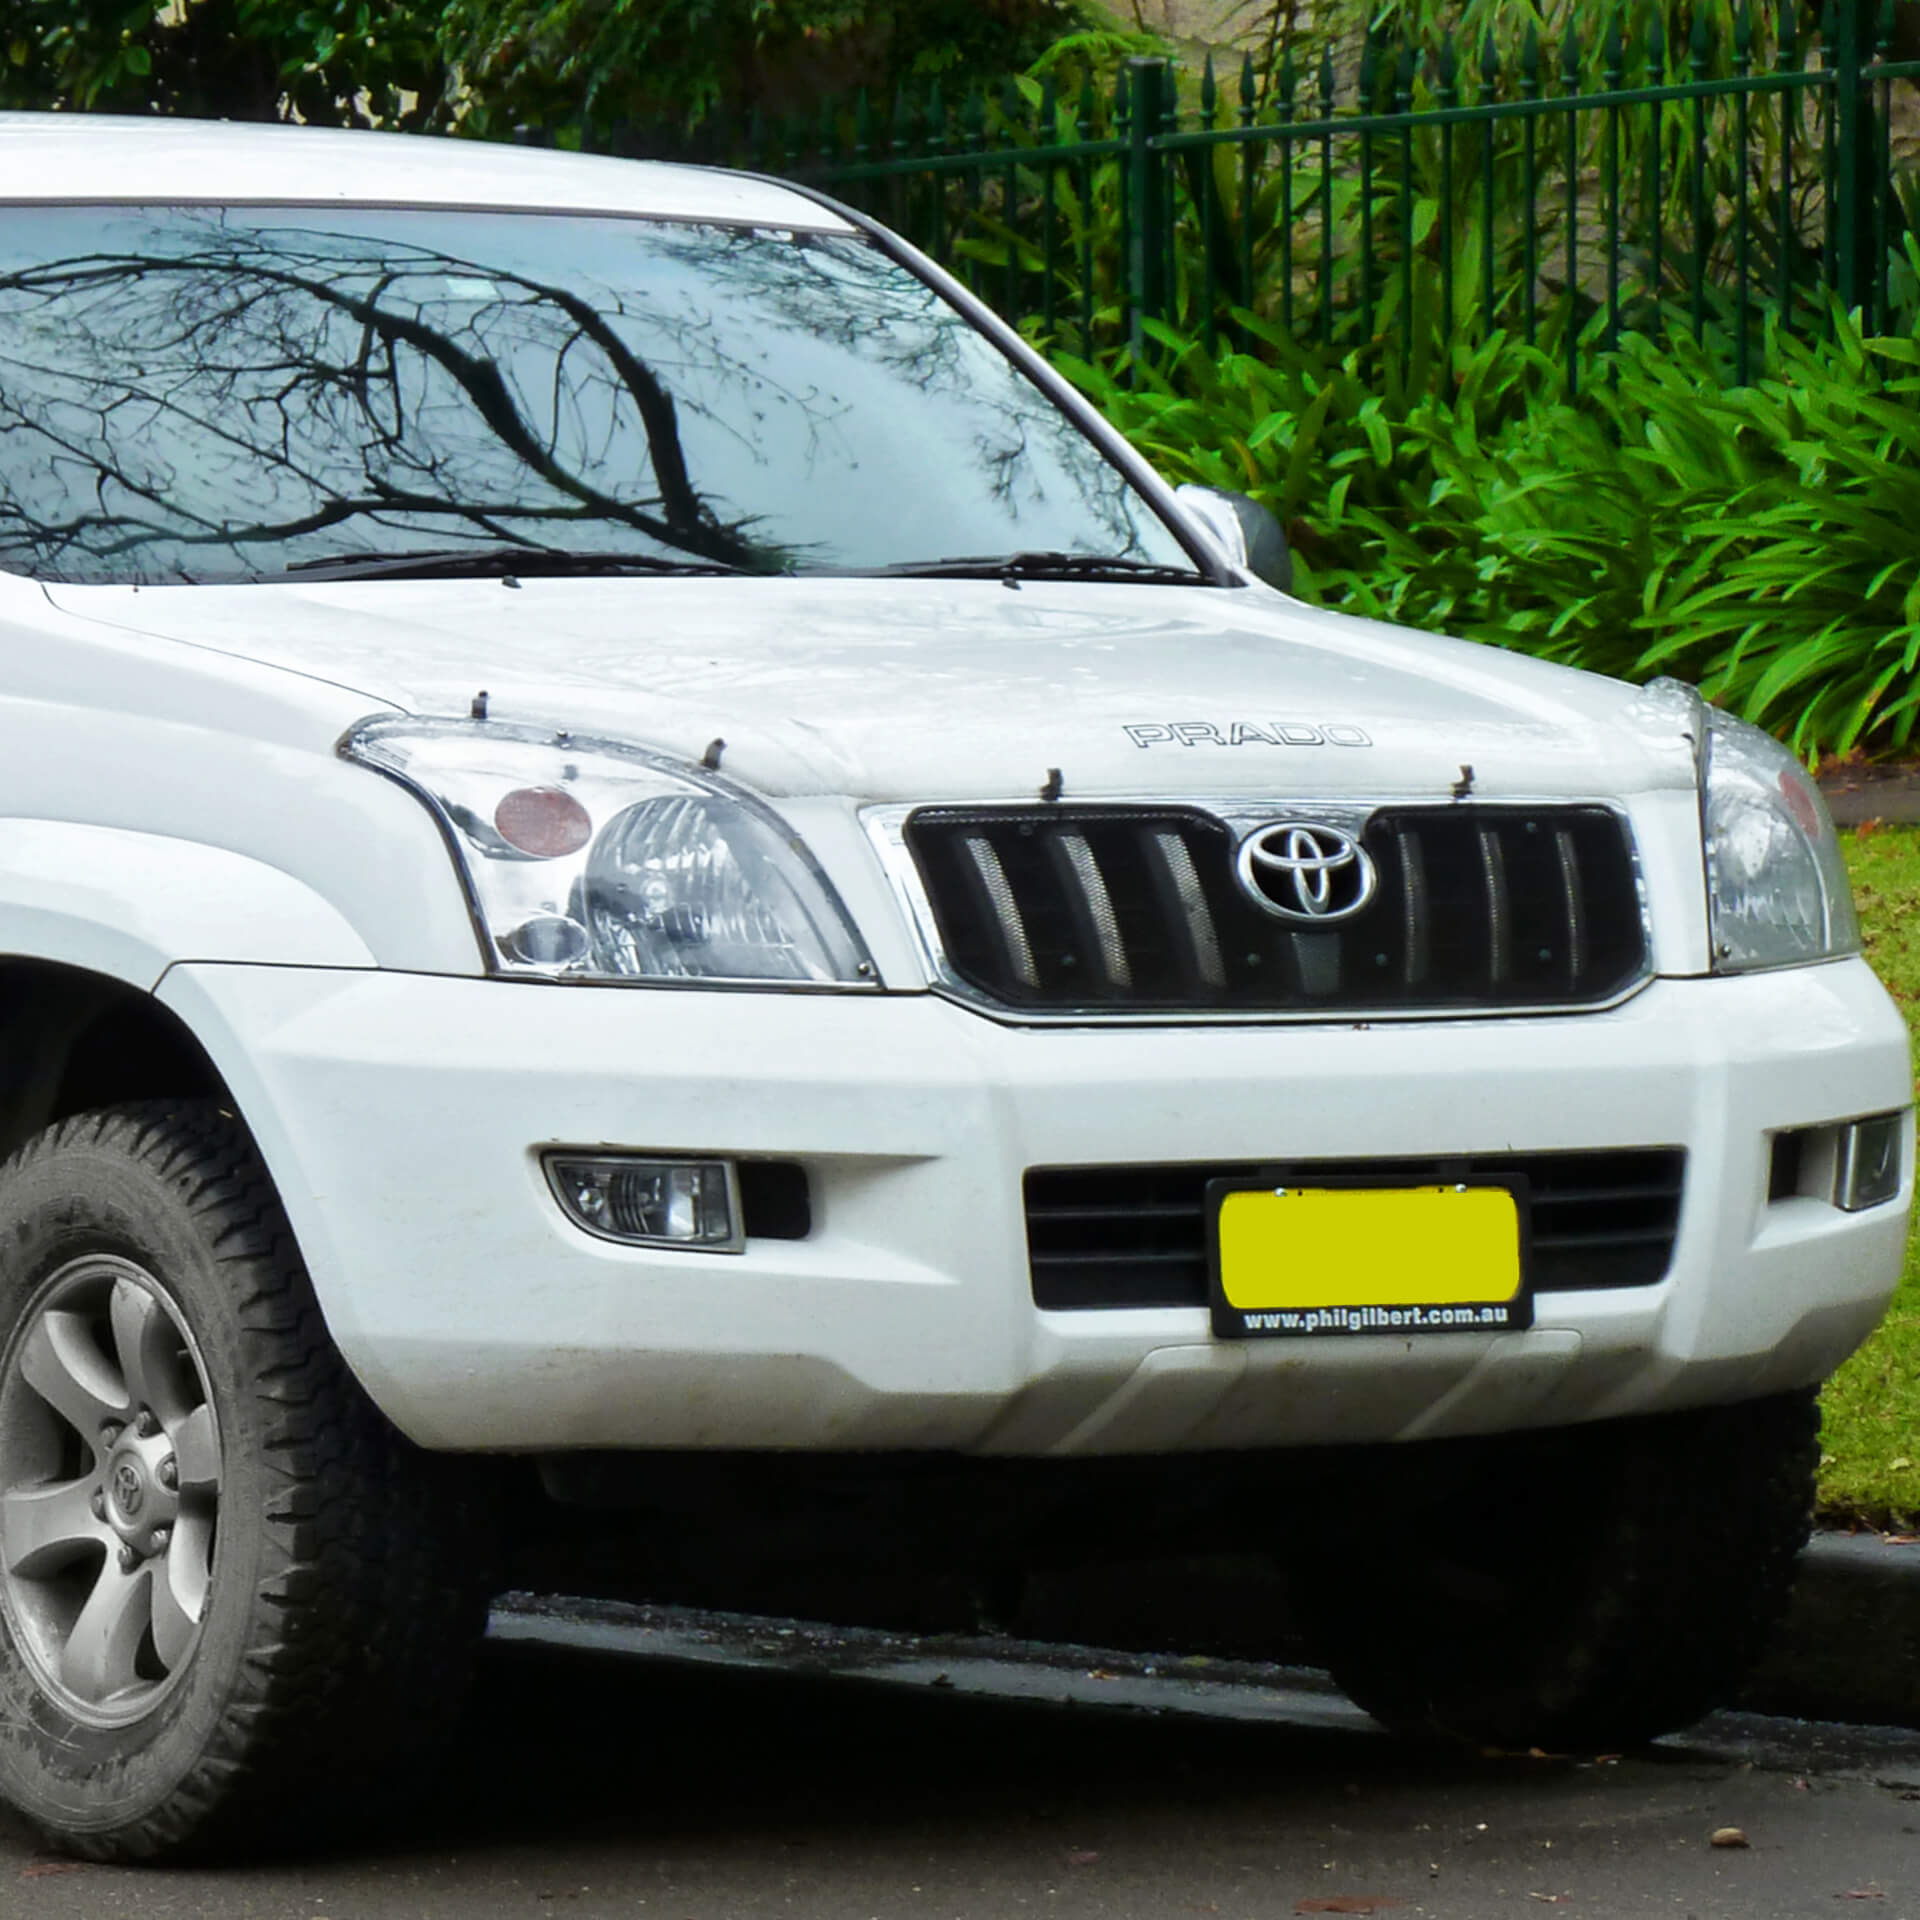 Direct4x4 accessories for Toyota Land Cruiser vehicles with a photo of the front of a white Toyota Land Cruiser parked by a grass verge